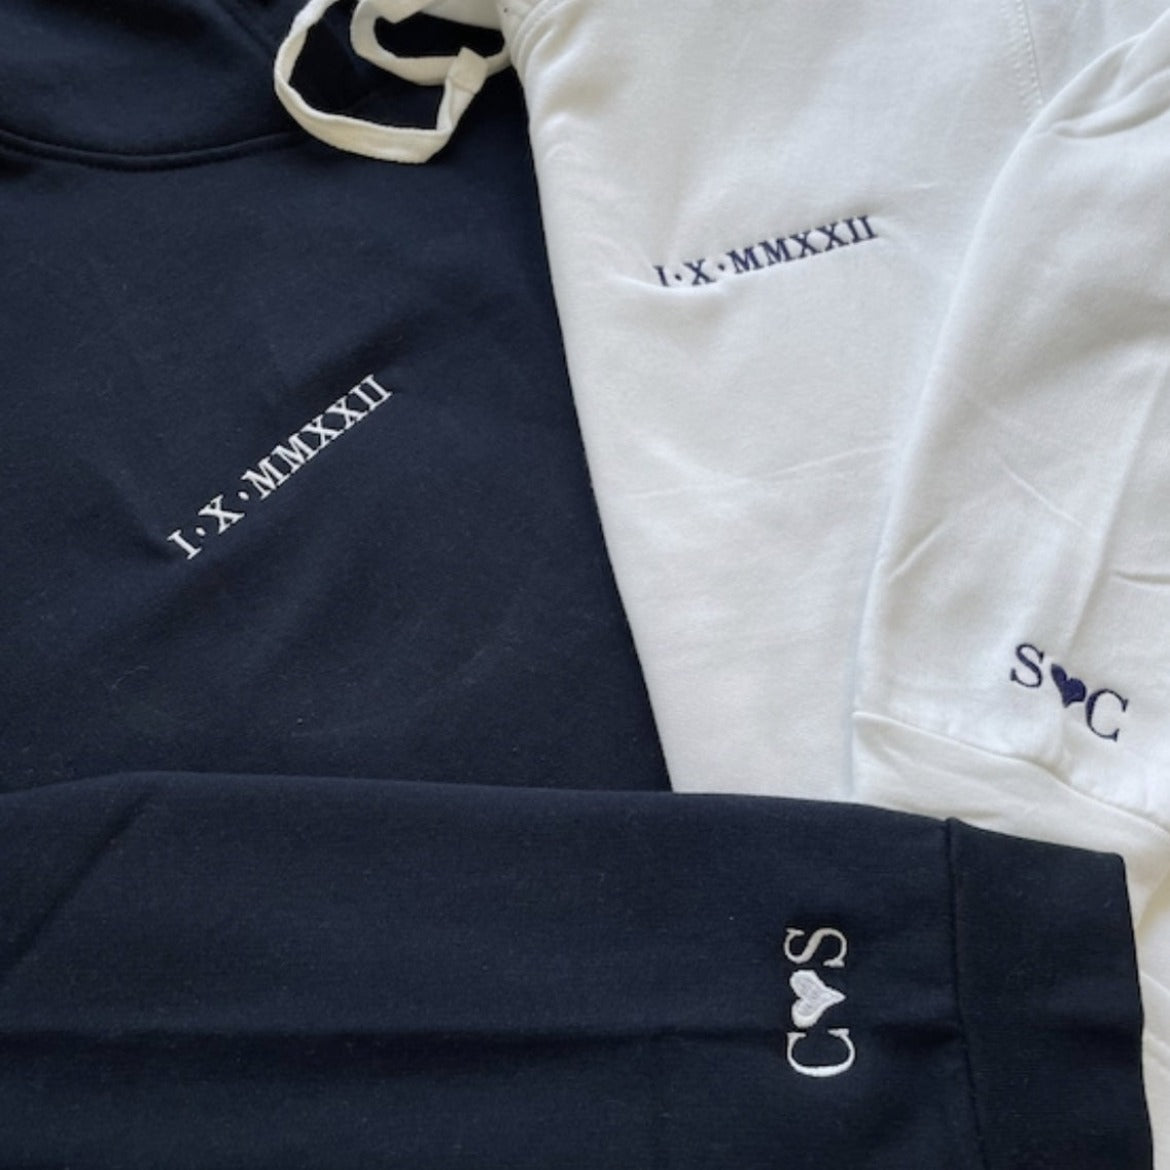 Personalized Roman numeral hoodie for men in navy blue and white.